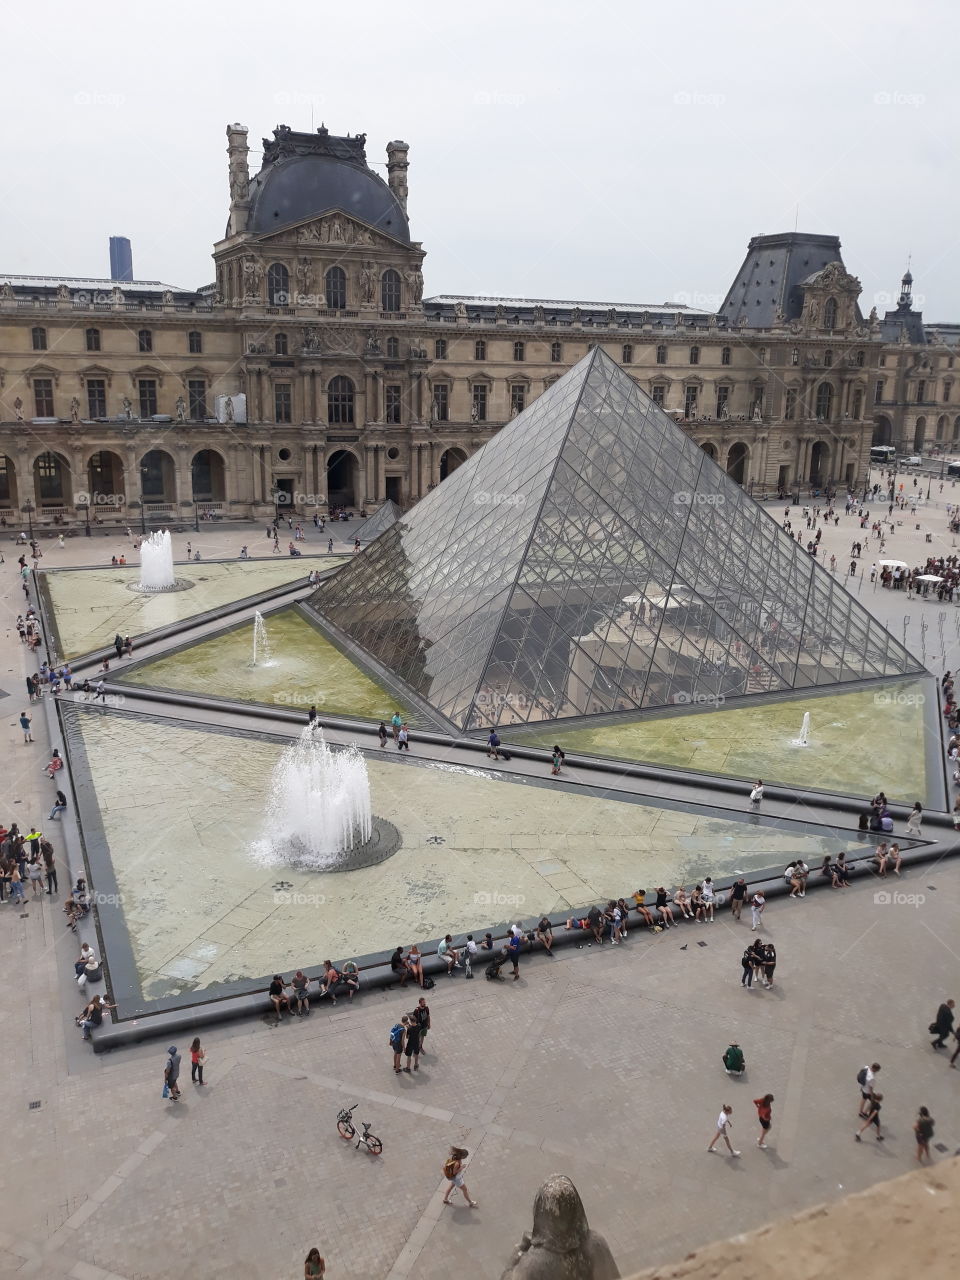 LOUVRE MUSEUM FROM PARIS